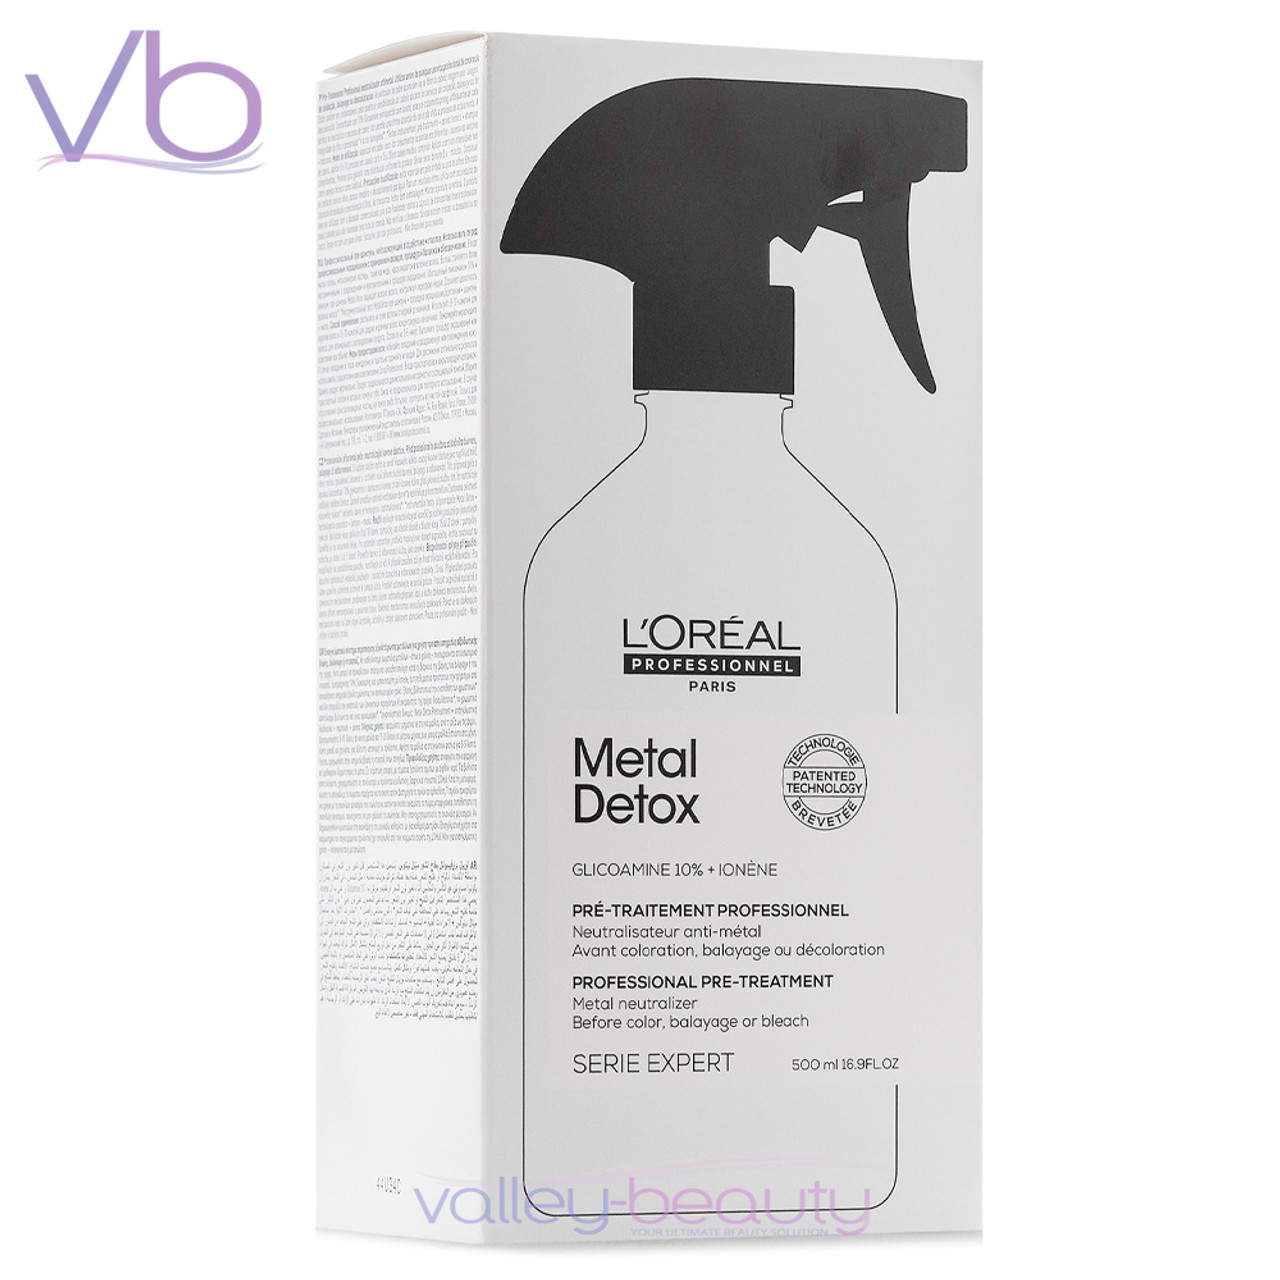 L'Oreal L’Oreal Professionnel Serie Expert Metal Detox Pre-Treatment | Neutralizing Spray Before Color, Balayage or Bleach, 16.9fl.oz.